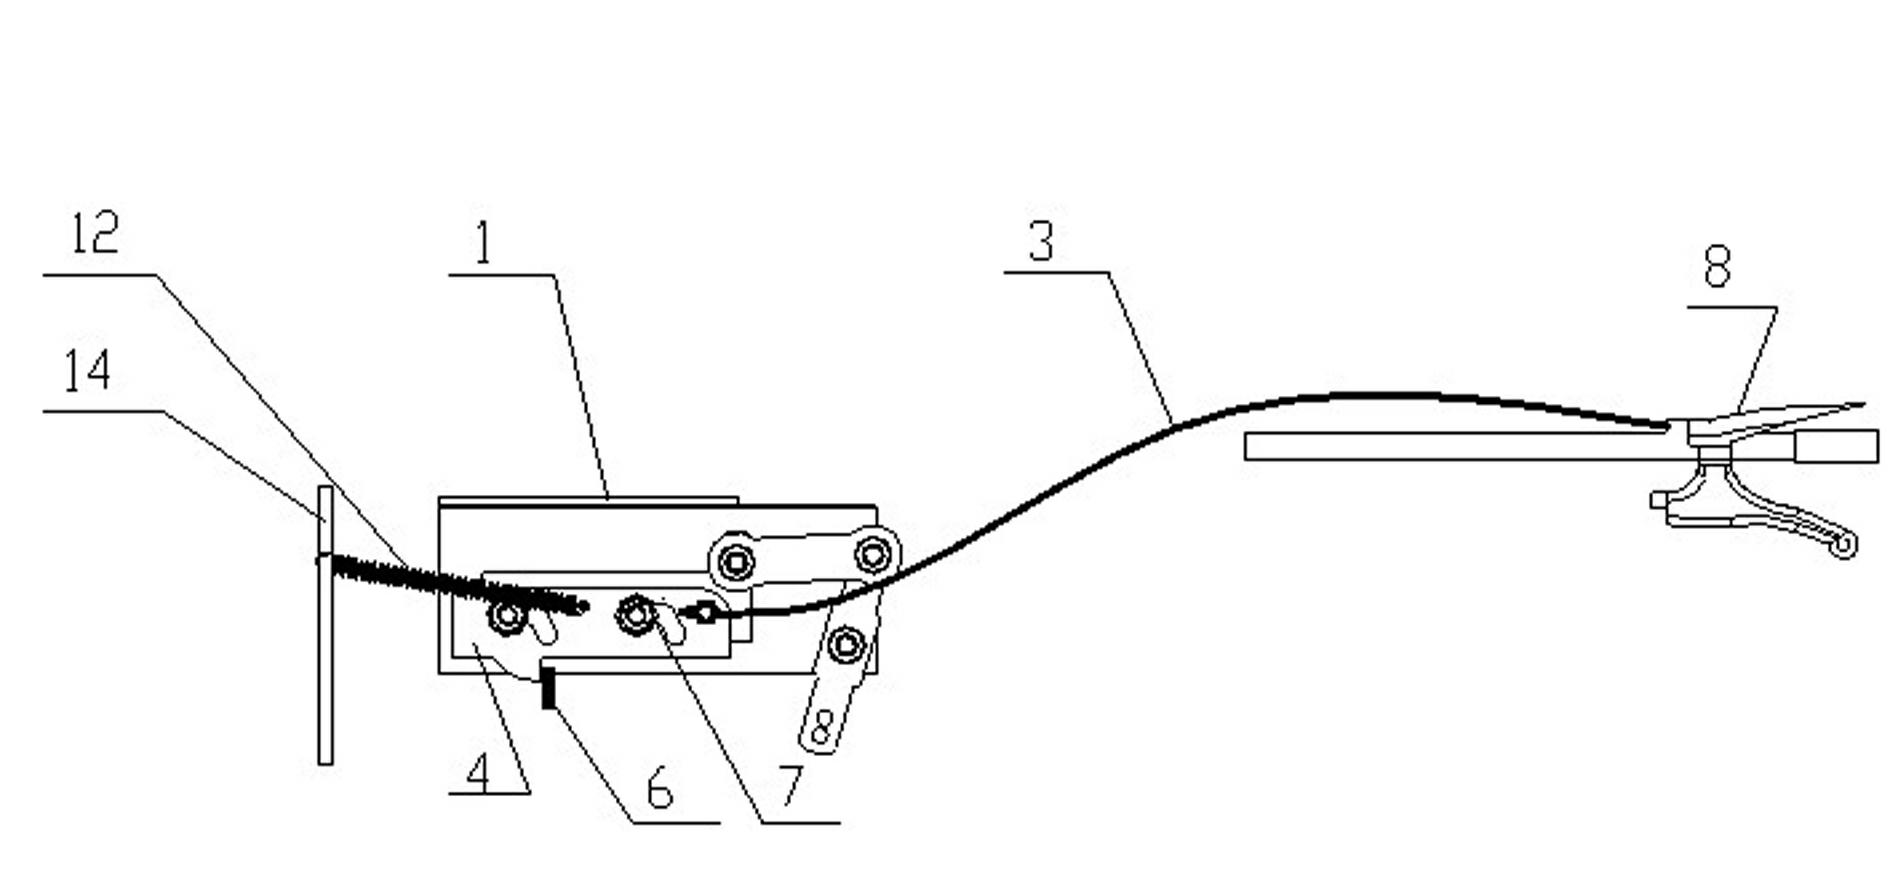 Gear shifting device for hydraulic carrying truck